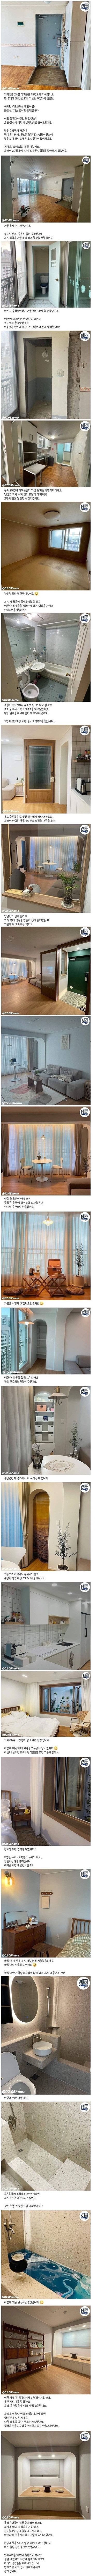 Renovation of 24 pyeong apartment in 1997 jpg